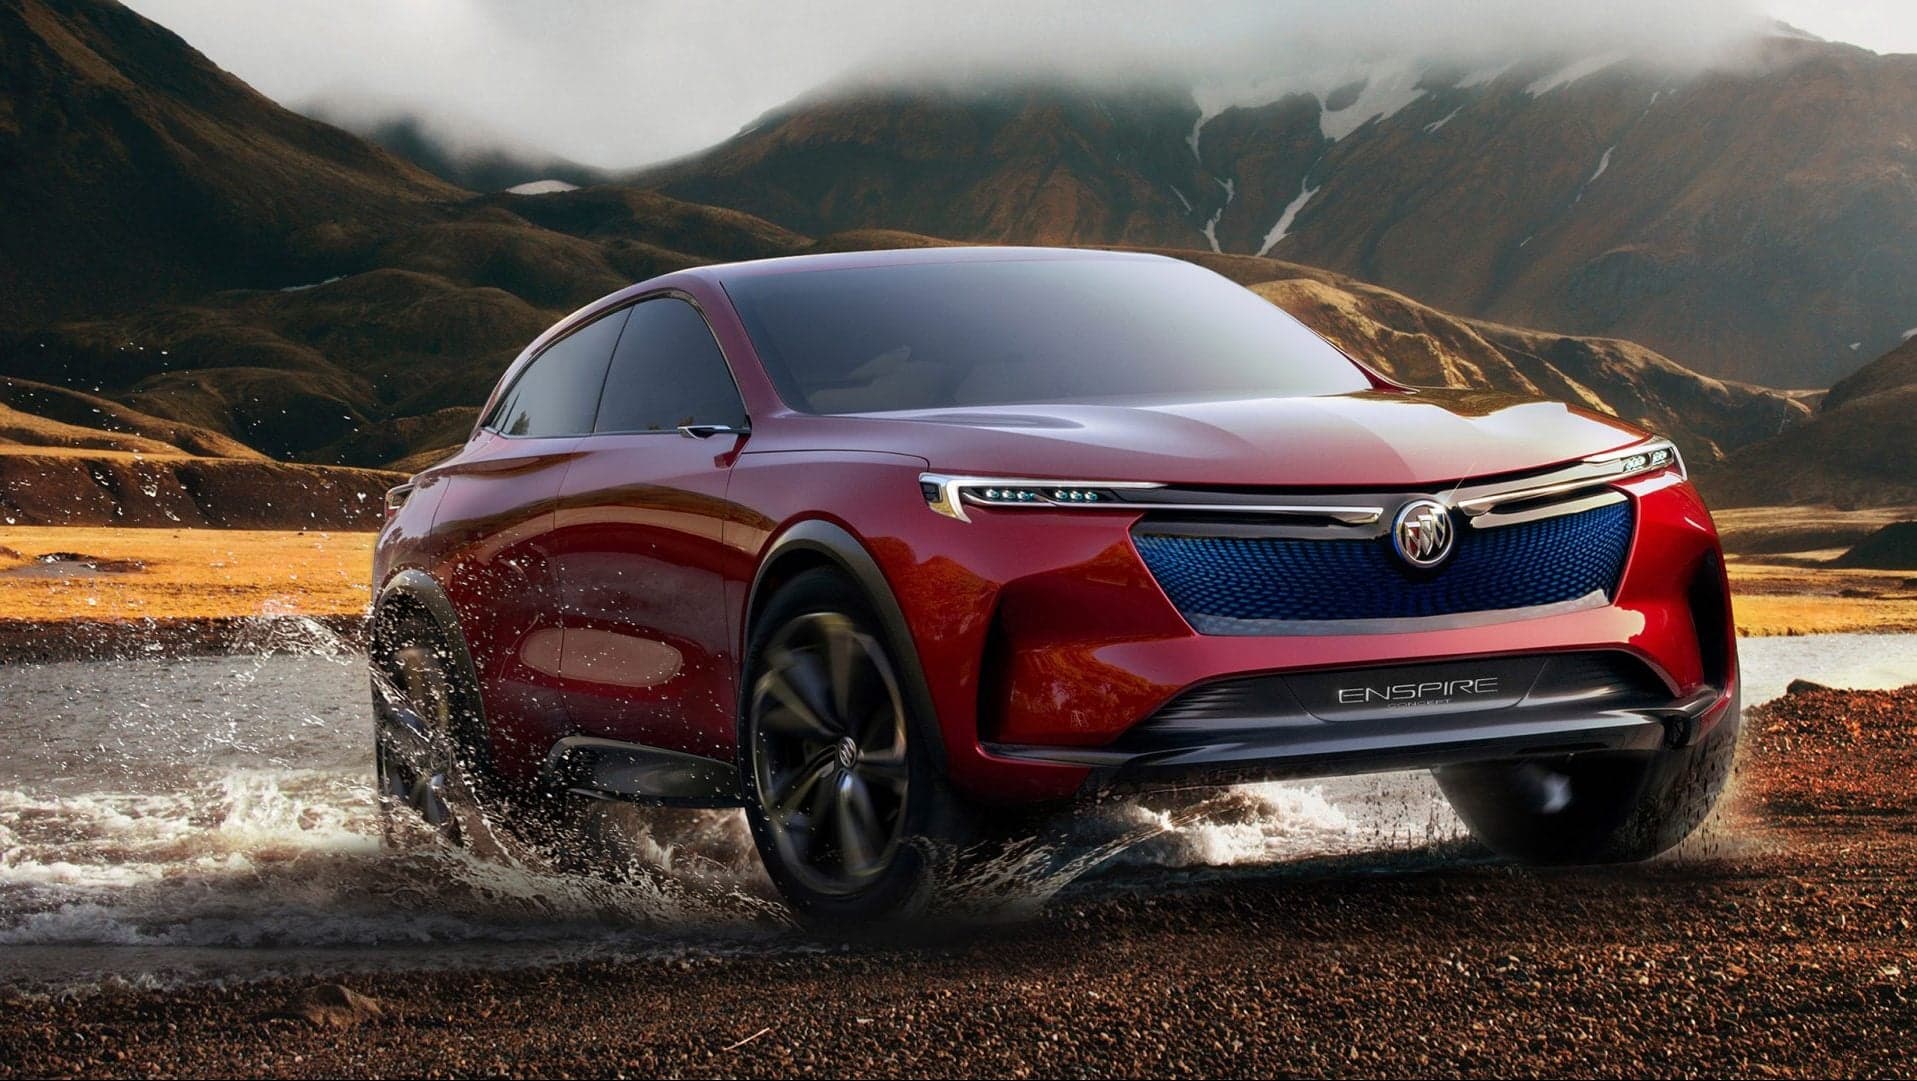 This Is Buick’s ‘Enspire’ Electric Crossover Concept